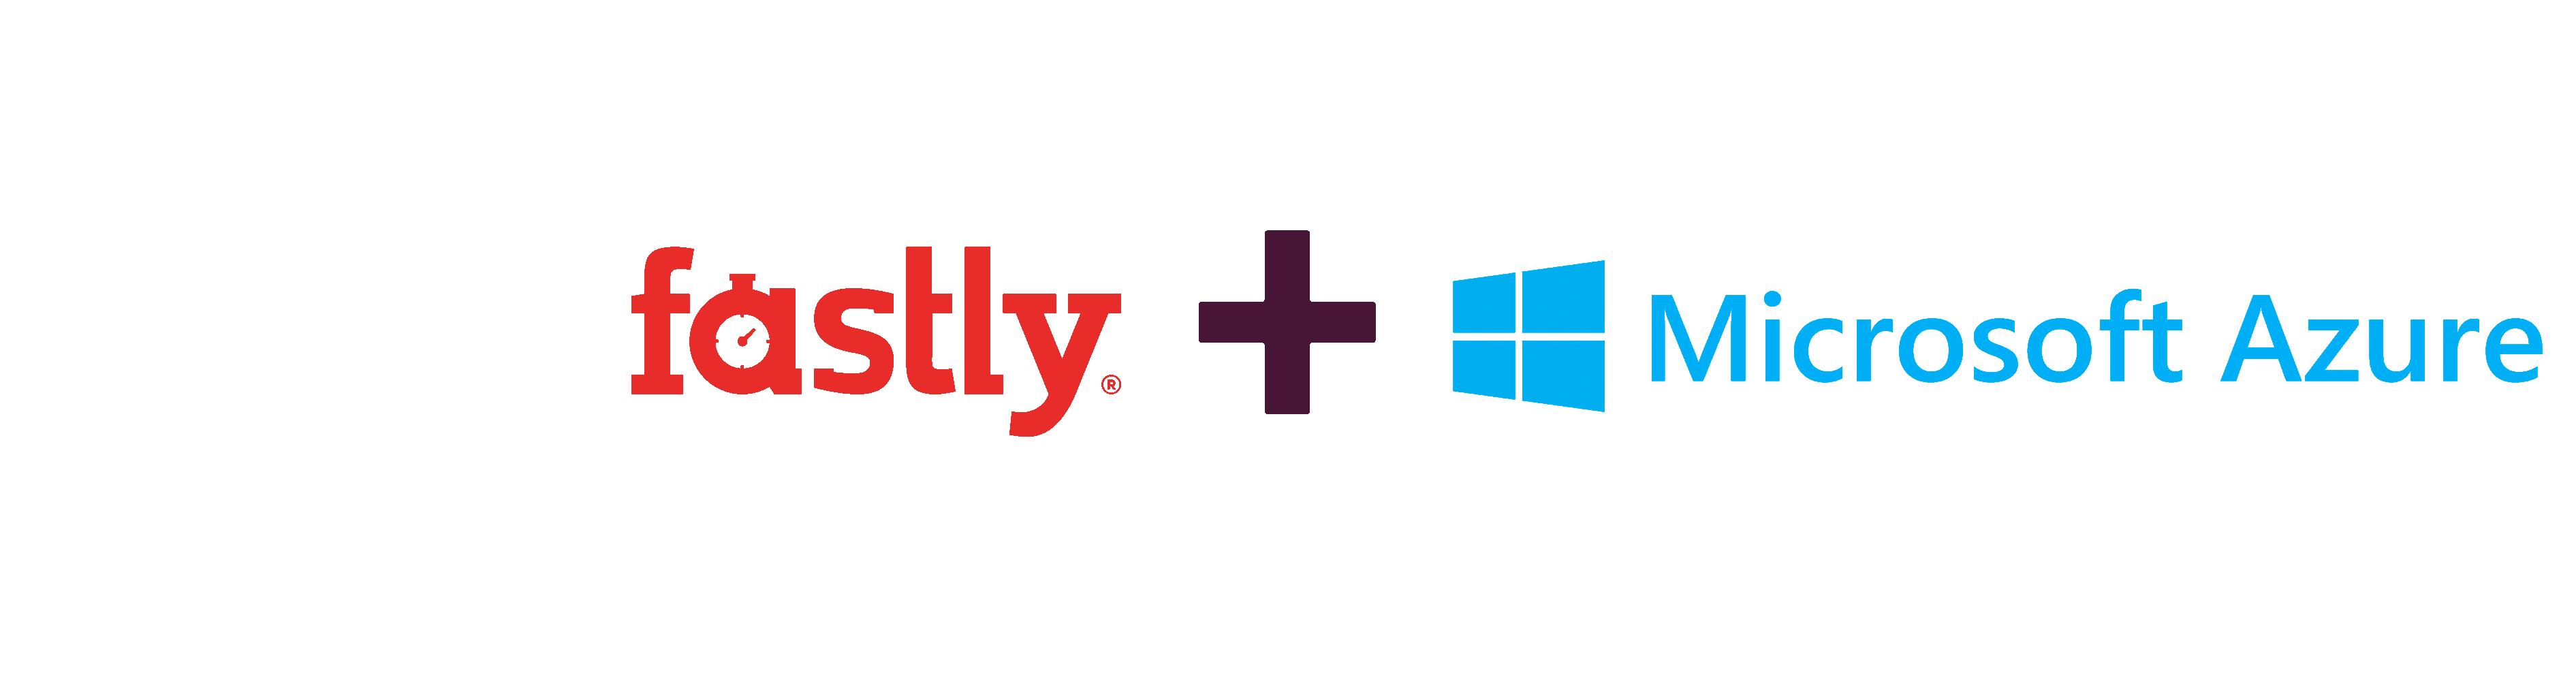 fastly edge cloud azure 2019 new